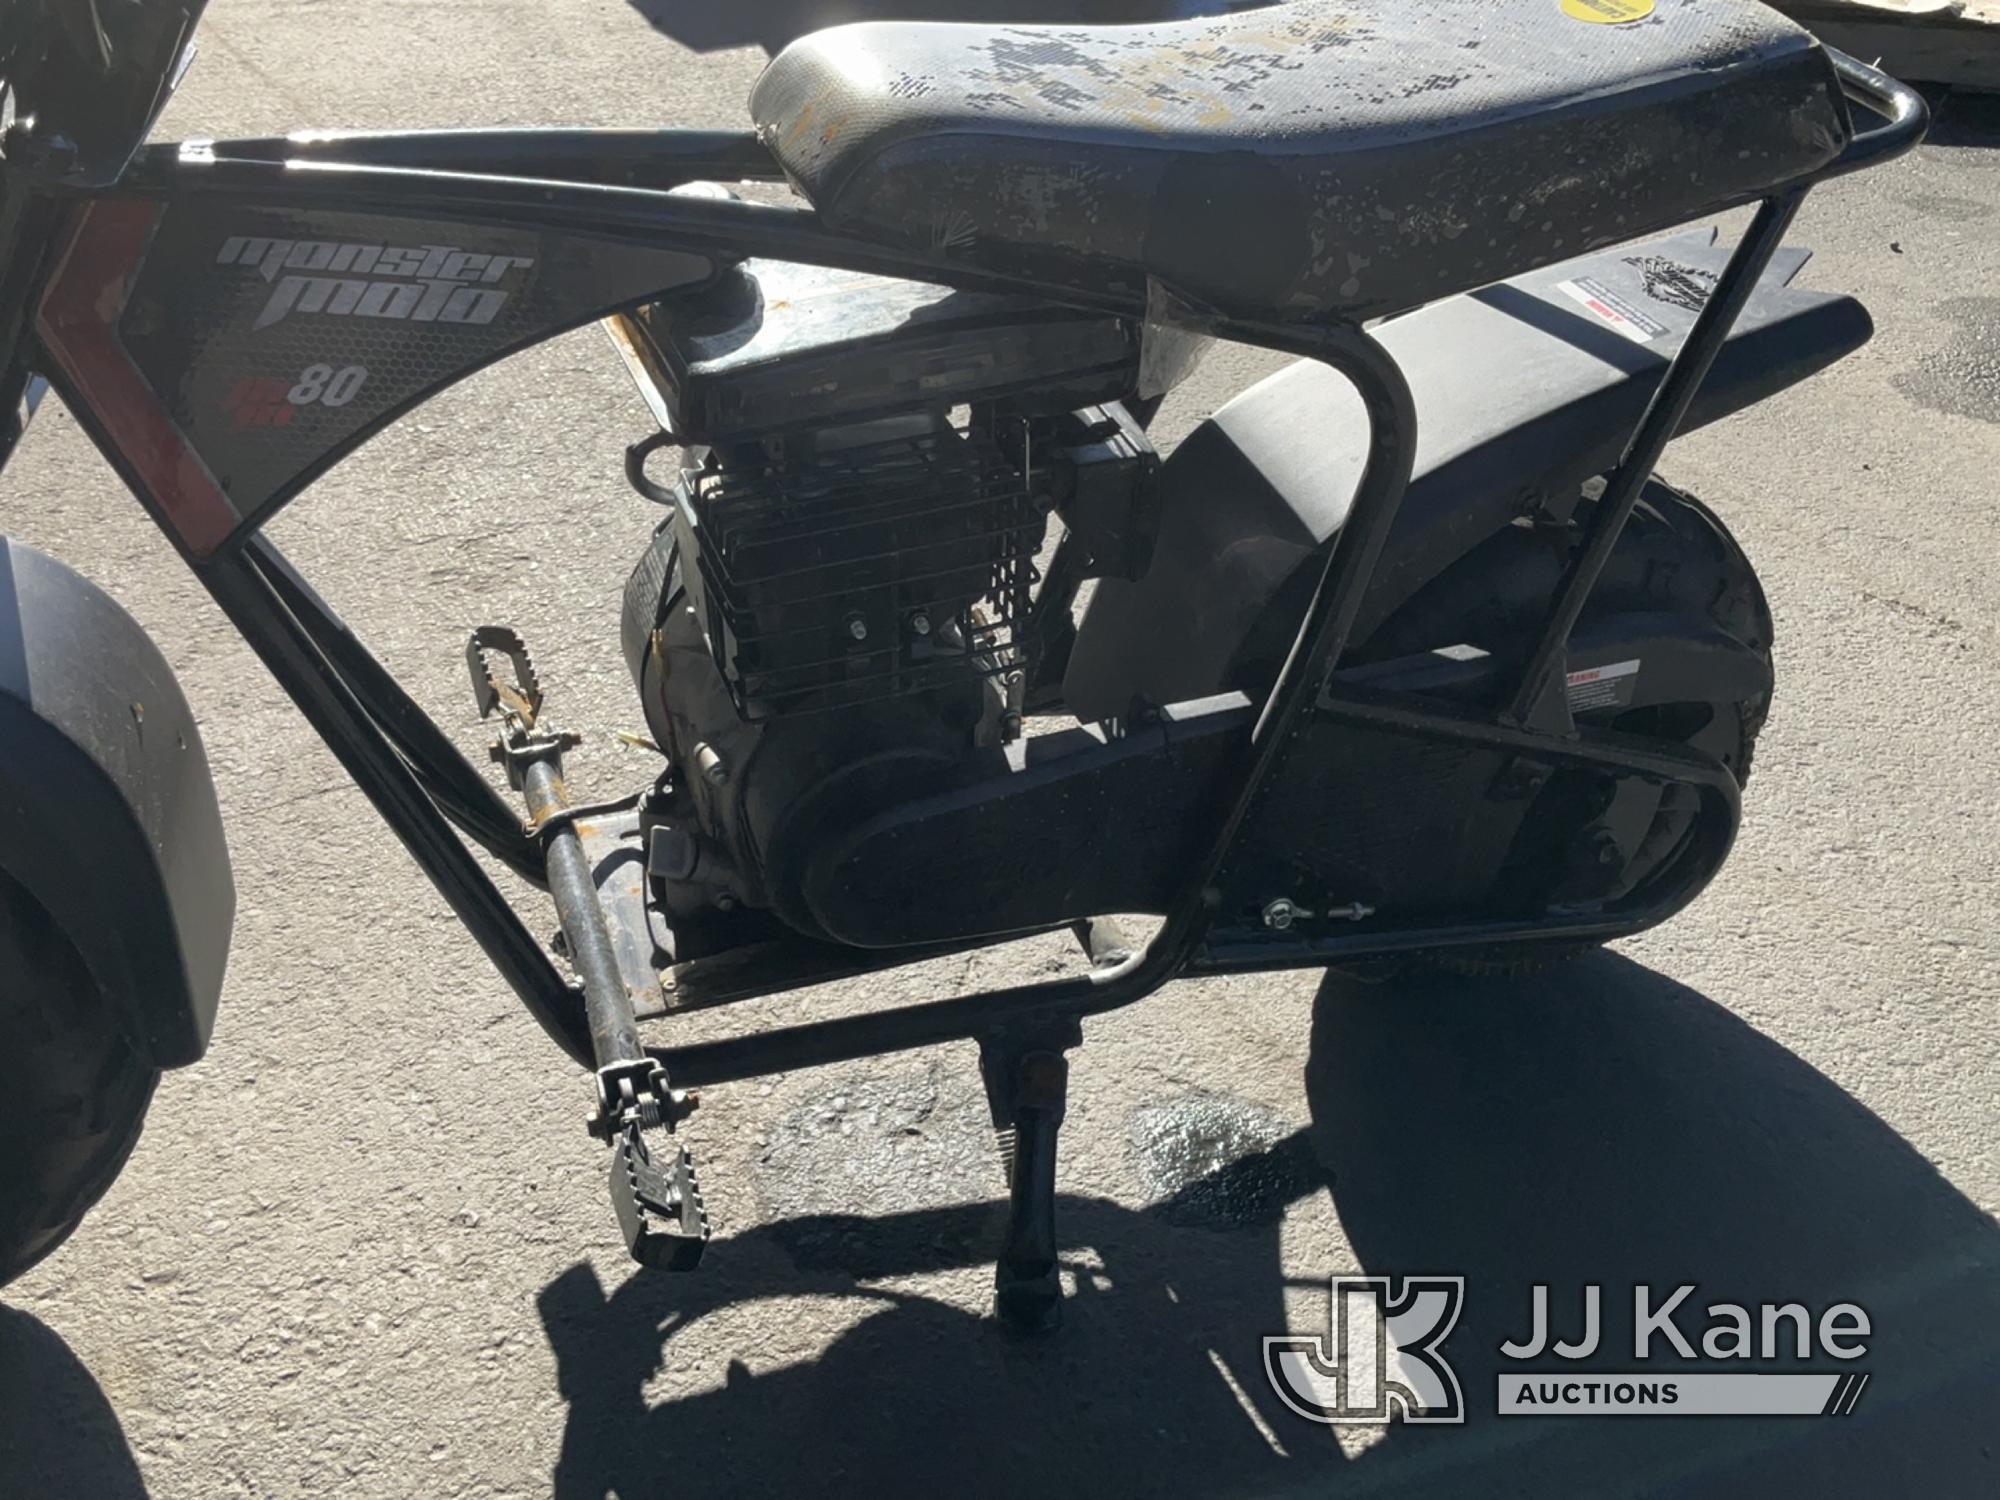 (Jurupa Valley, CA) Monster Moto Gas Powered Mini Bike (Used) NOTE: This unit is being sold AS IS/WH